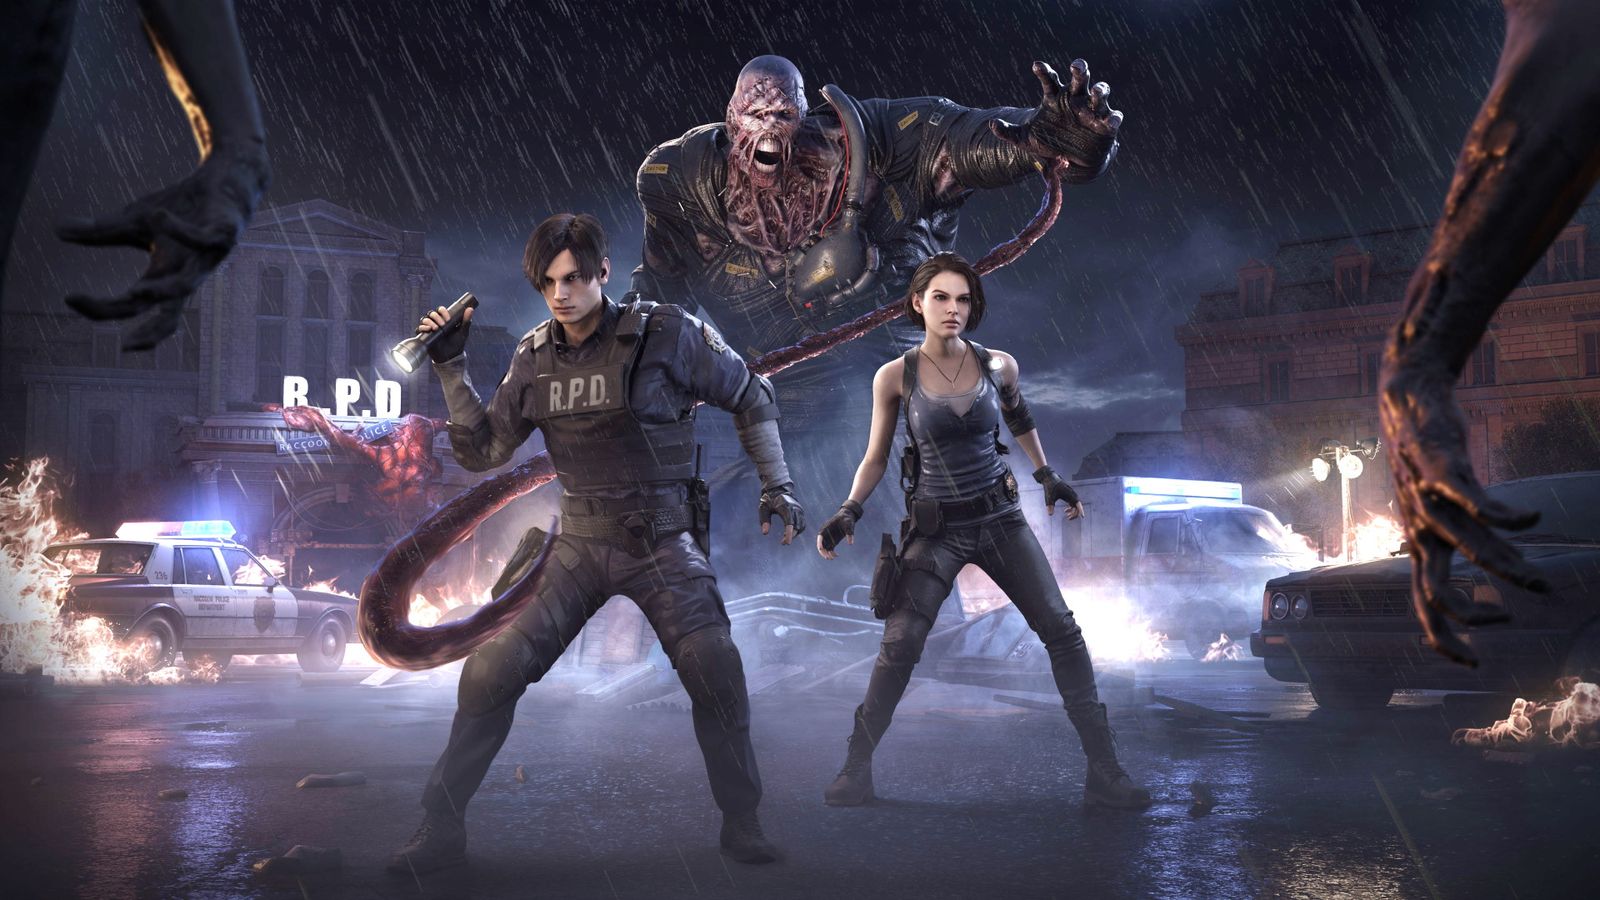 Nemesis, Jill Valentine and Leon S Kennedy in Dead by Daylight